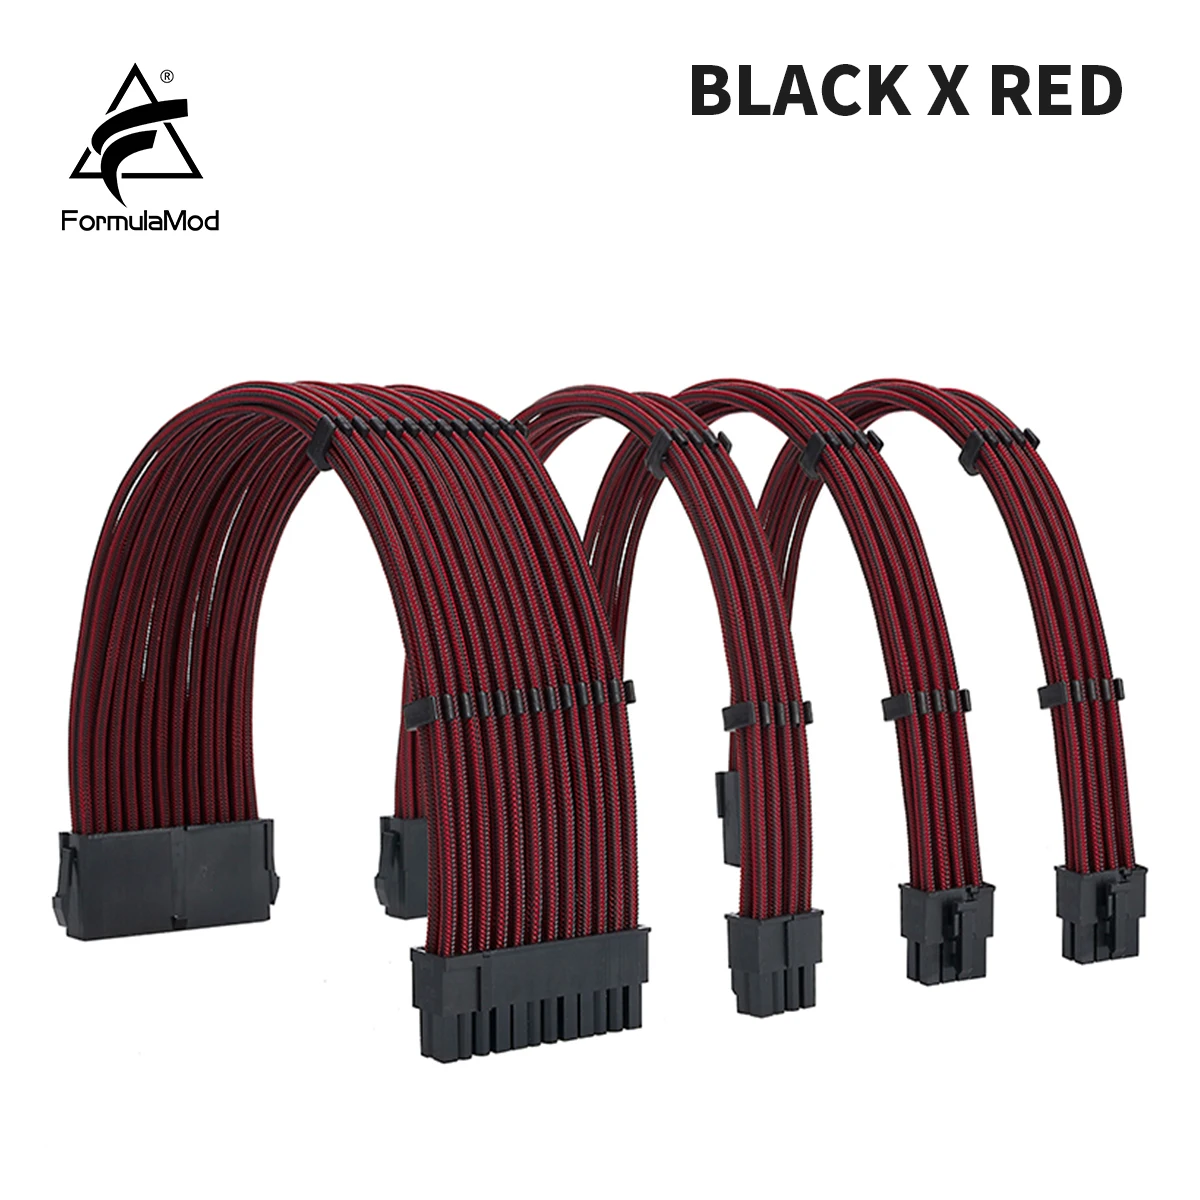 FormulaMod NCK1 Series PSU Extension Cable Kit , Mix Color Cable Solid Combo 300mm ATX24Pin PCI-E8Pin CPU8Pin With Combs  